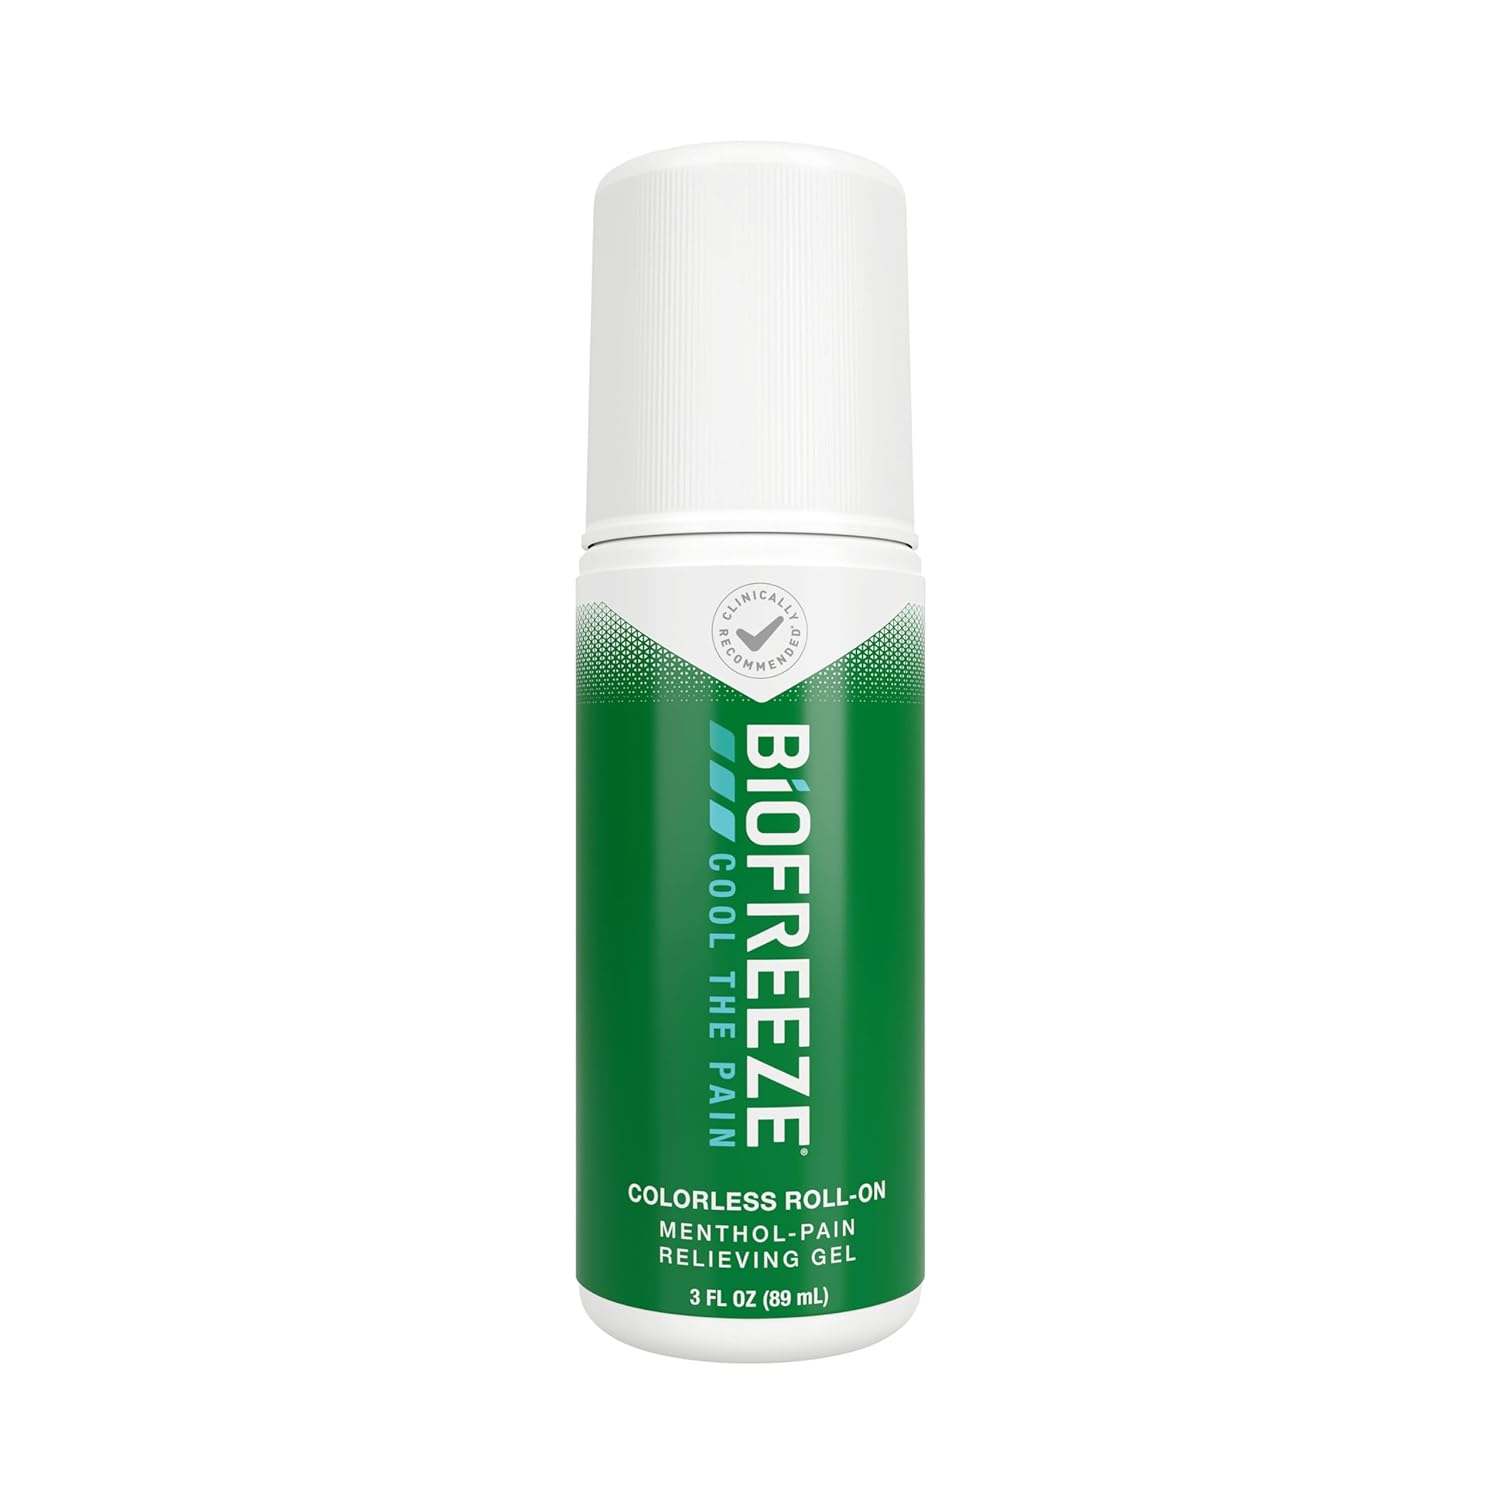 Biofreeze Pain Relief Gel, Arthritis Pain Reliver, Knee & Lower Back Pain Relief, Sore Muscle Relief, Neck Pain Relief, Pharmacist Recommended, FSA Eligible, 3 FL OZ Biofreeze Menthol Gel